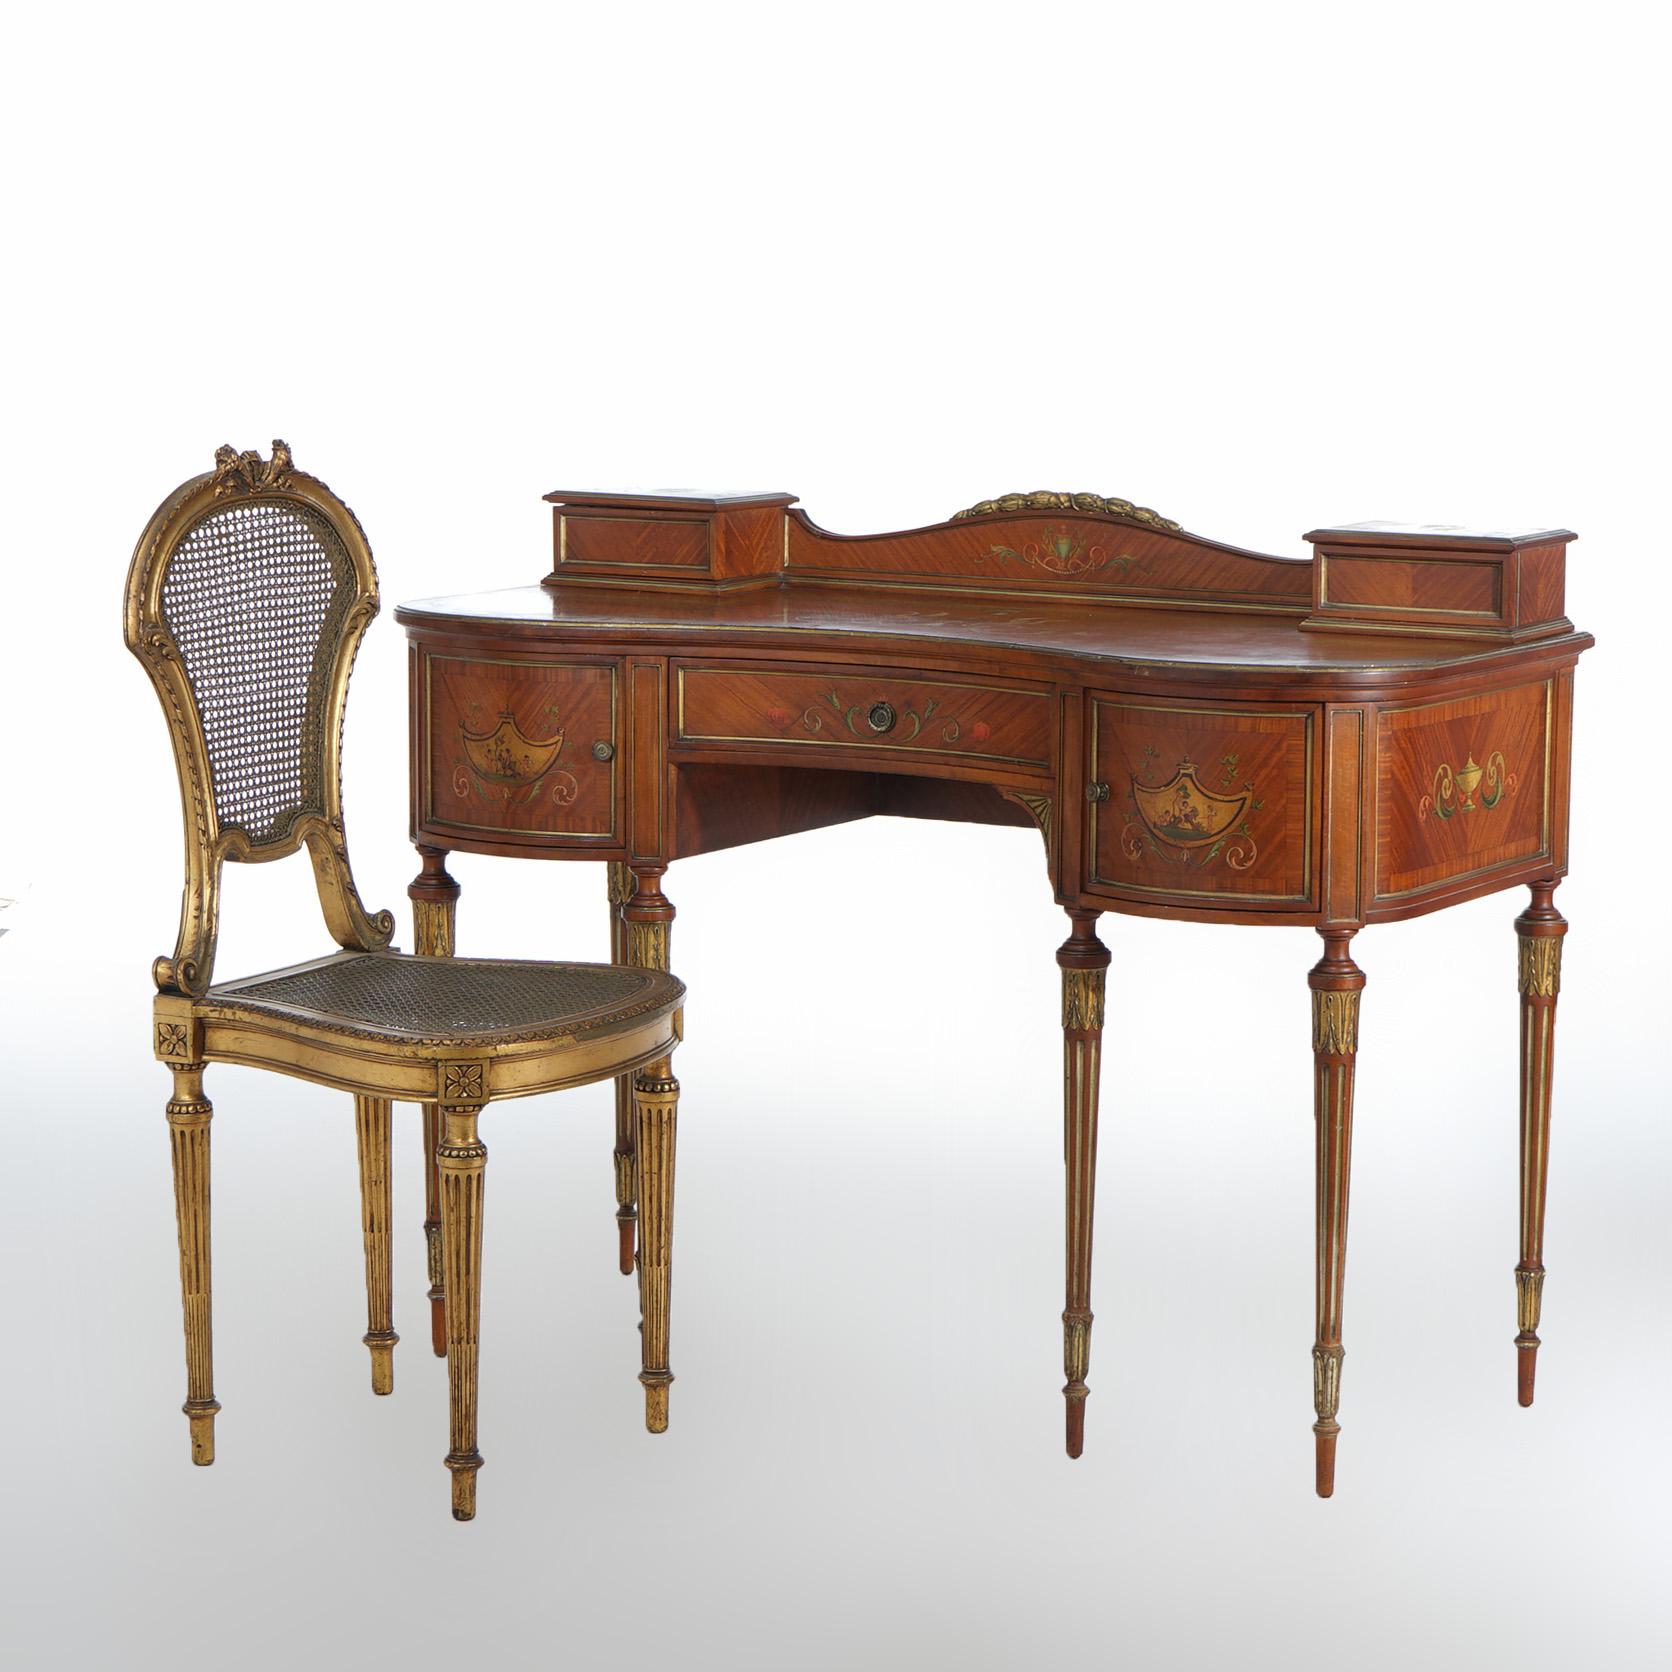 Antique French Style Adams Decorated Satinwood Vanity & Chair Circa 1900 15